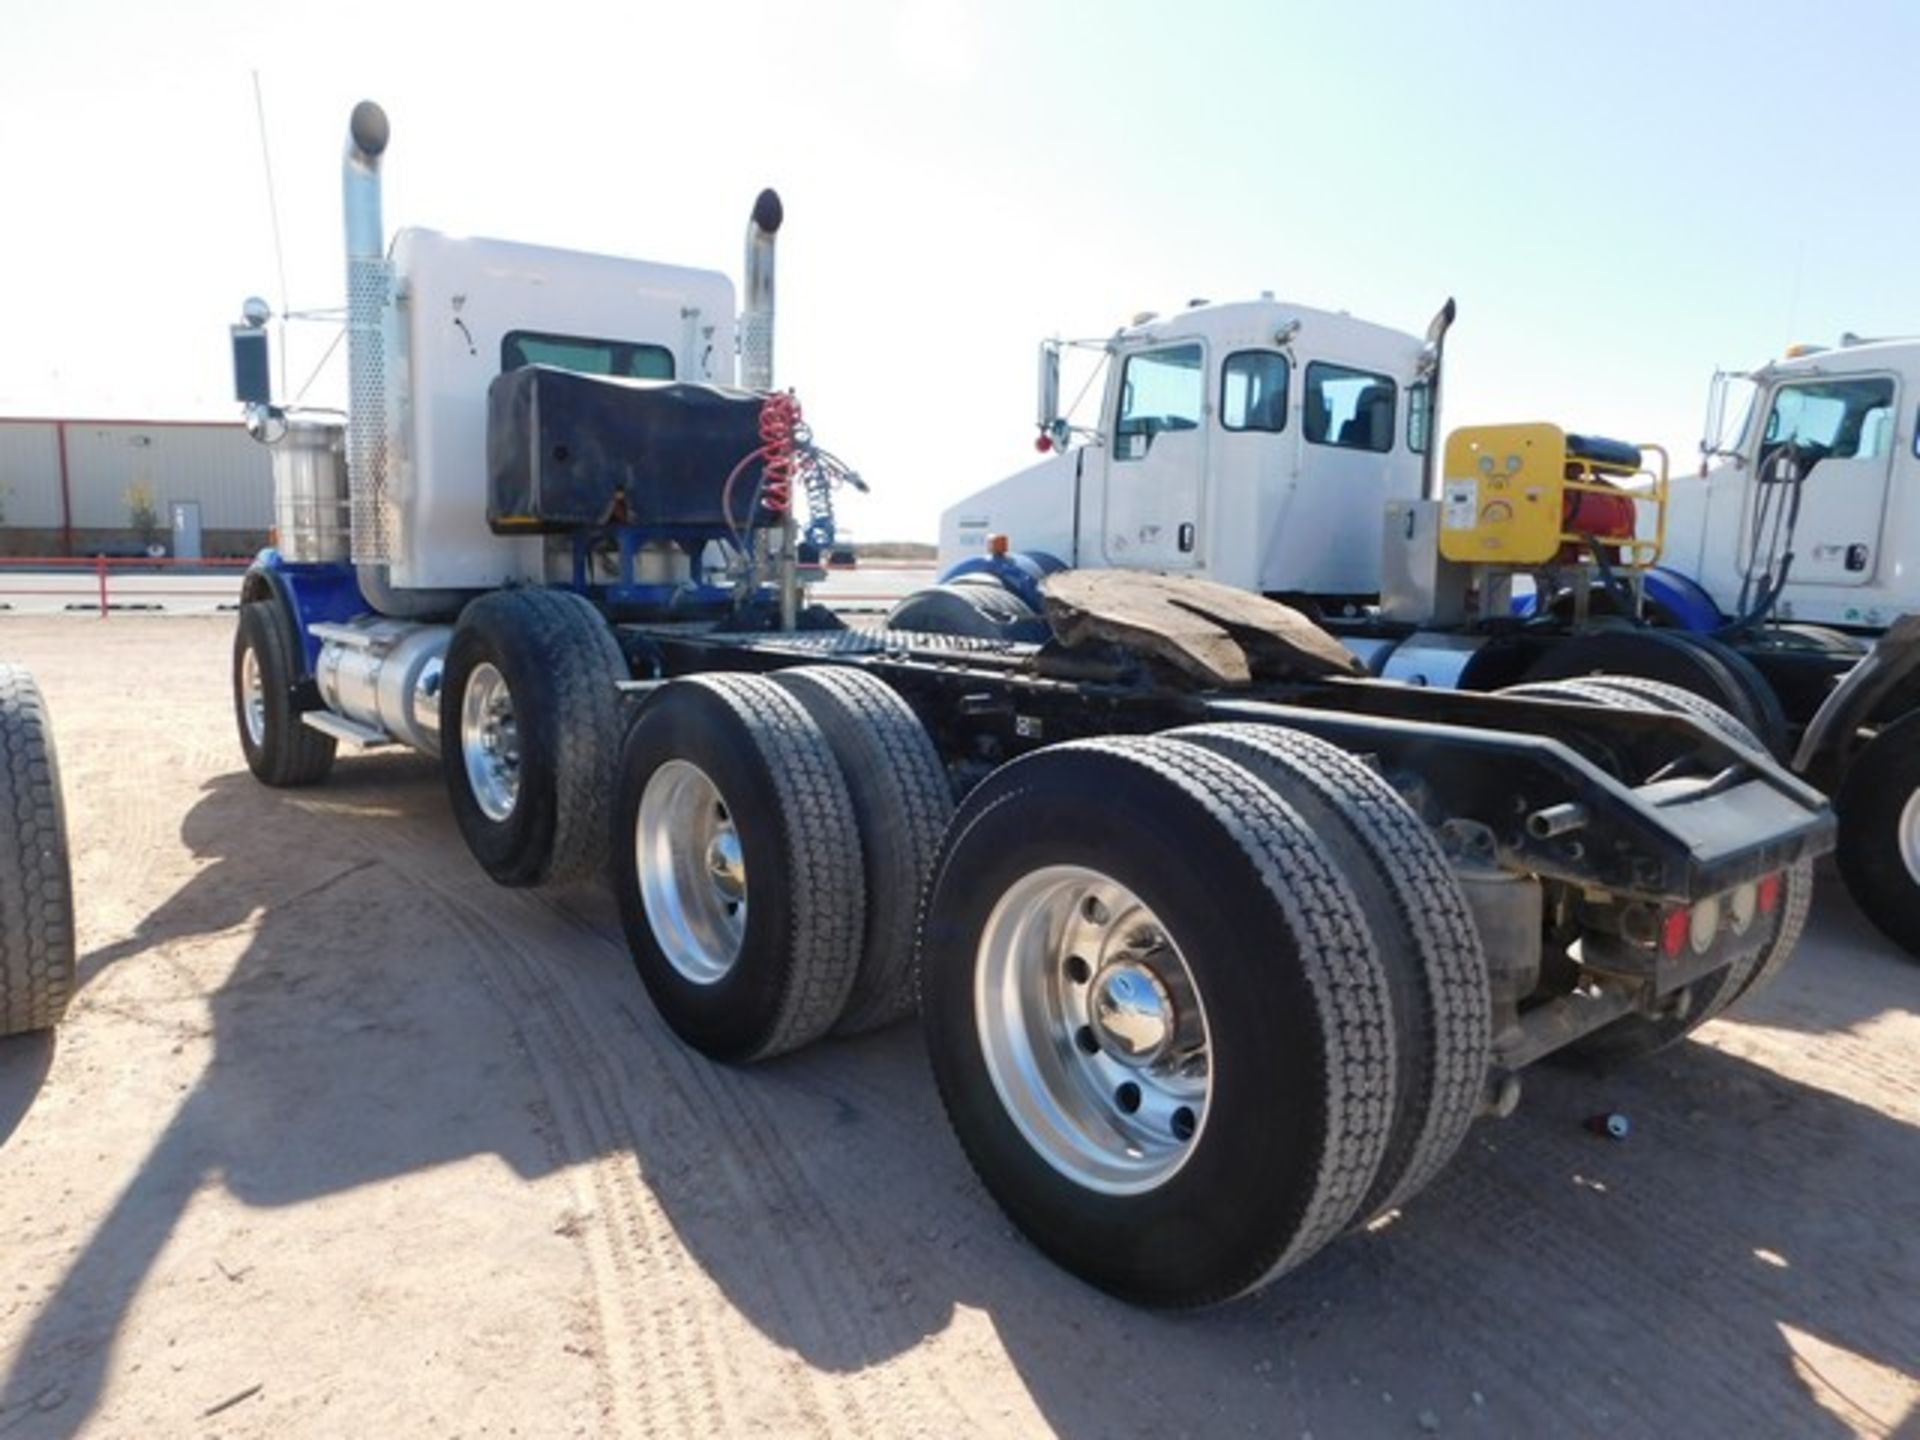 Located in YARD 1 - Midland, TX (2262) (X) 2012 KENWORTH T800 4 AXLE DAY CAB HAUL TRUCK, VIN- - Image 4 of 8